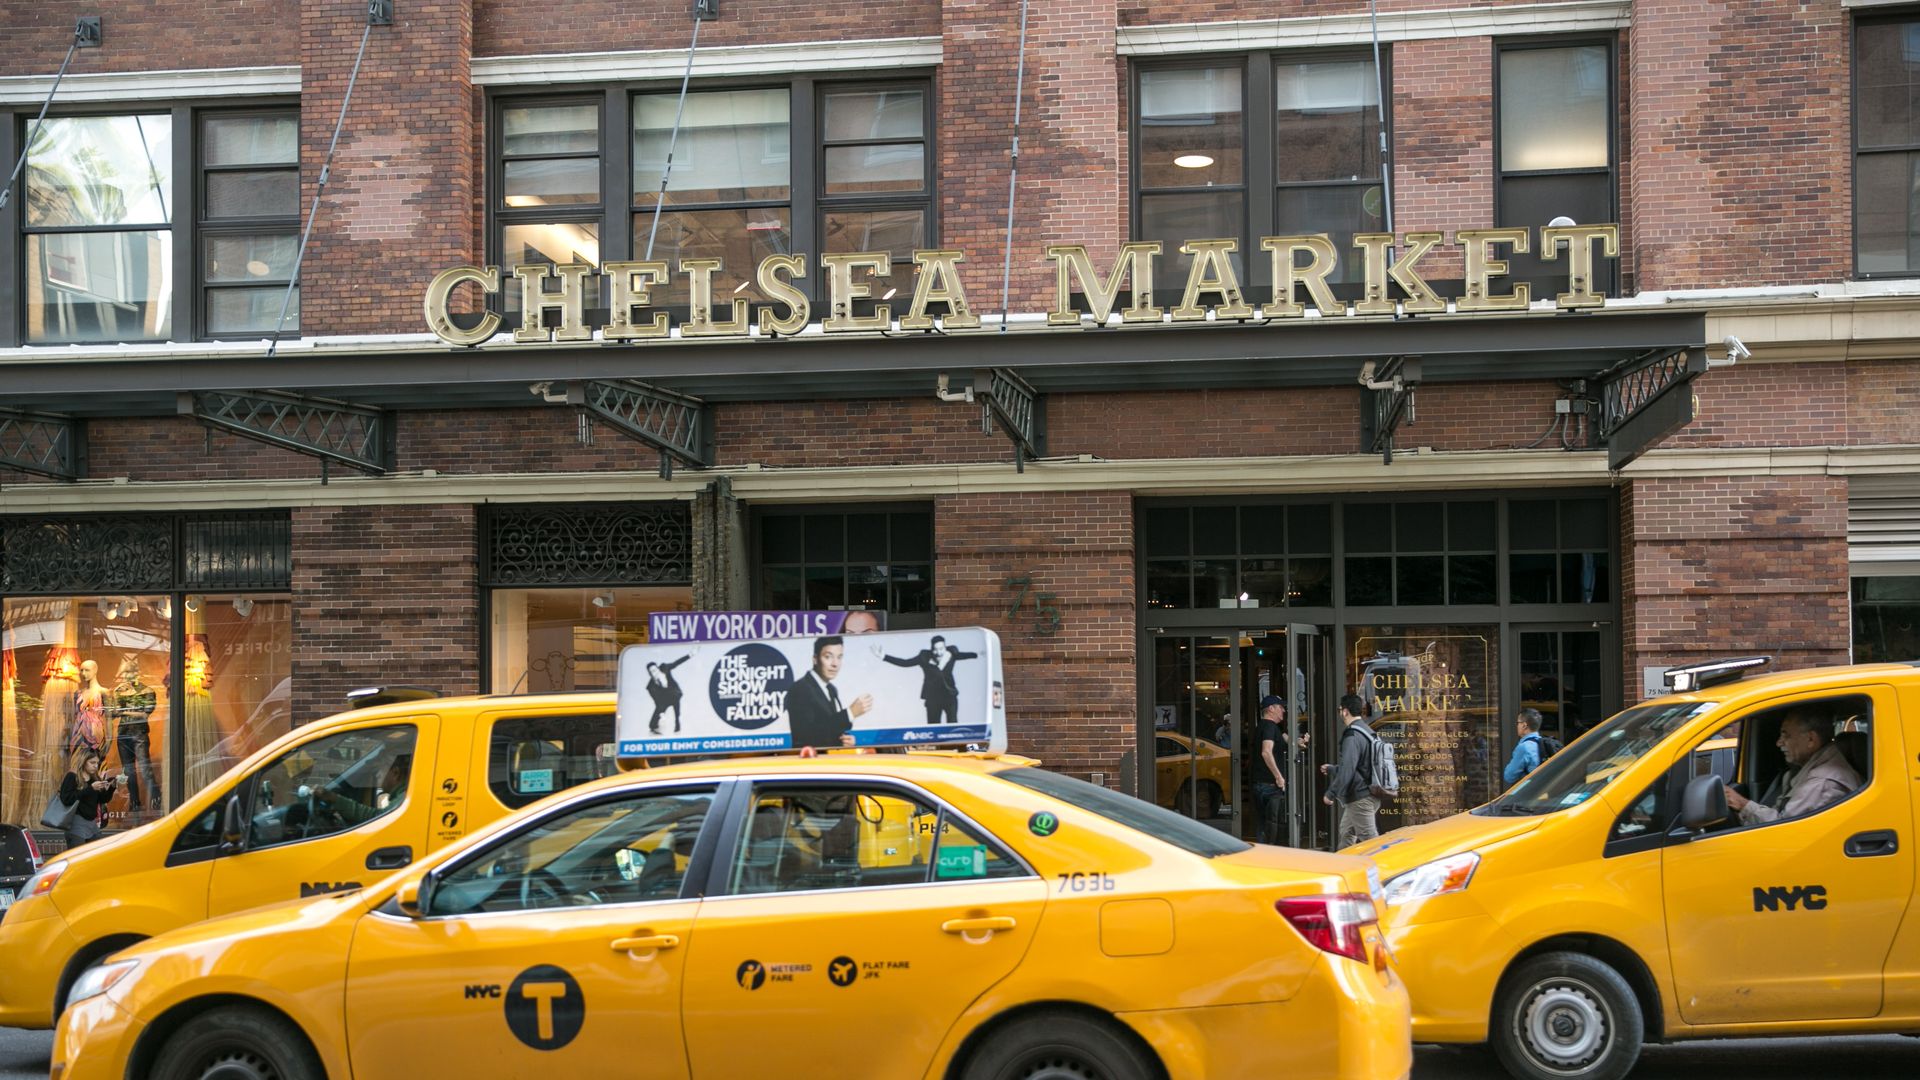 Yellow cabs in front of the entrance to the Chelsea Market building